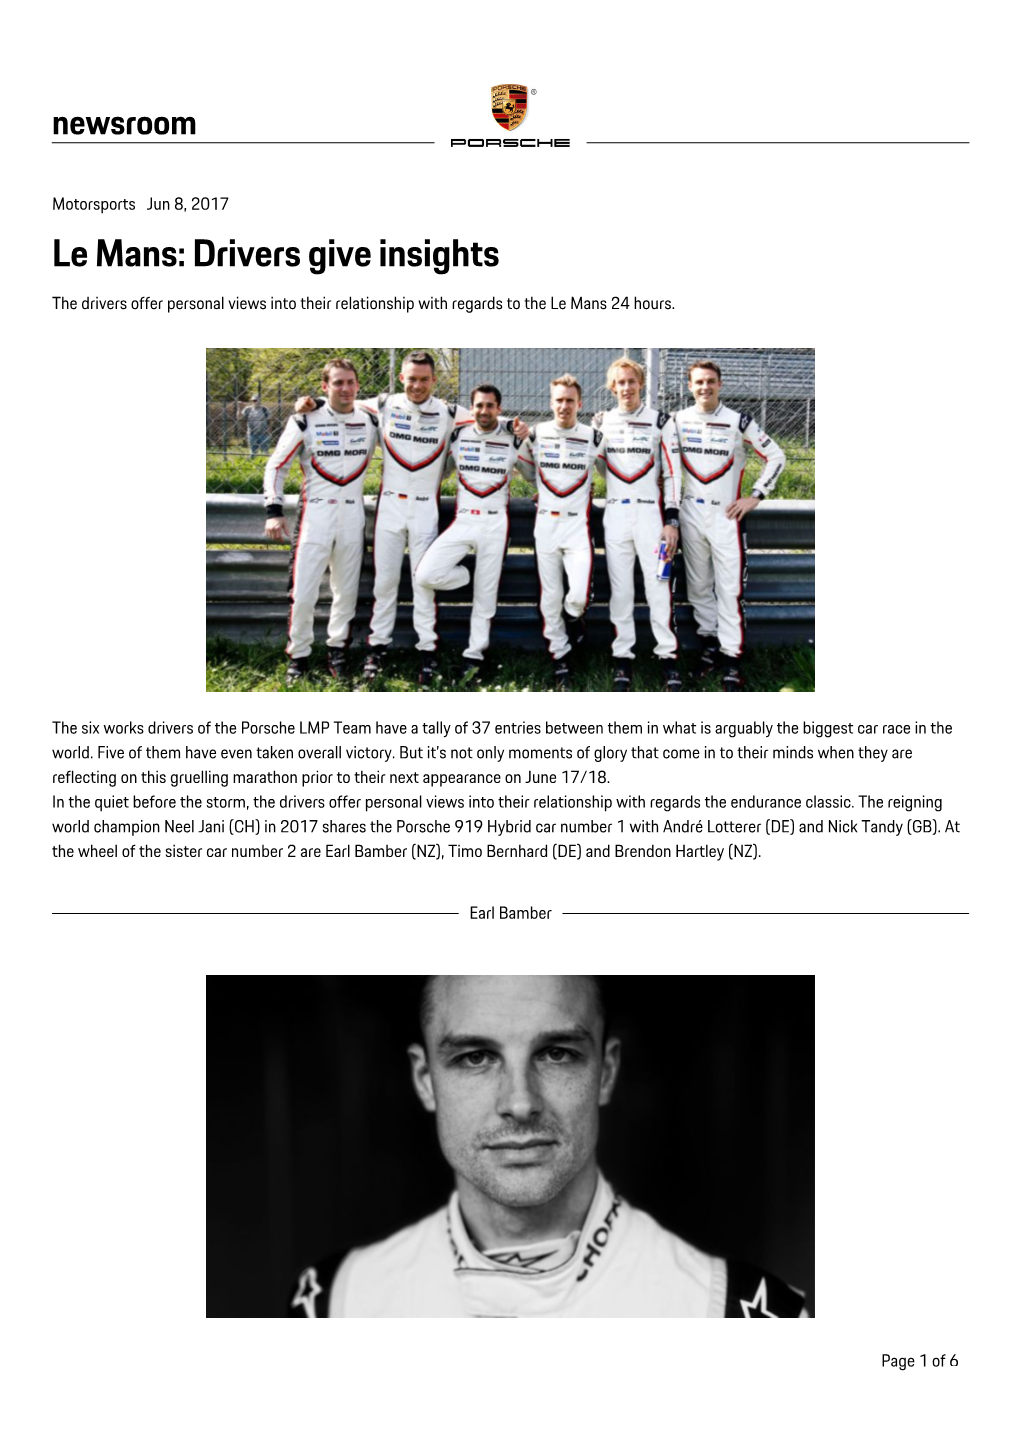 Le Mans: Drivers Give Insights the Drivers Offer Personal Views Into Their Relationship with Regards to the Le Mans 24 Hours